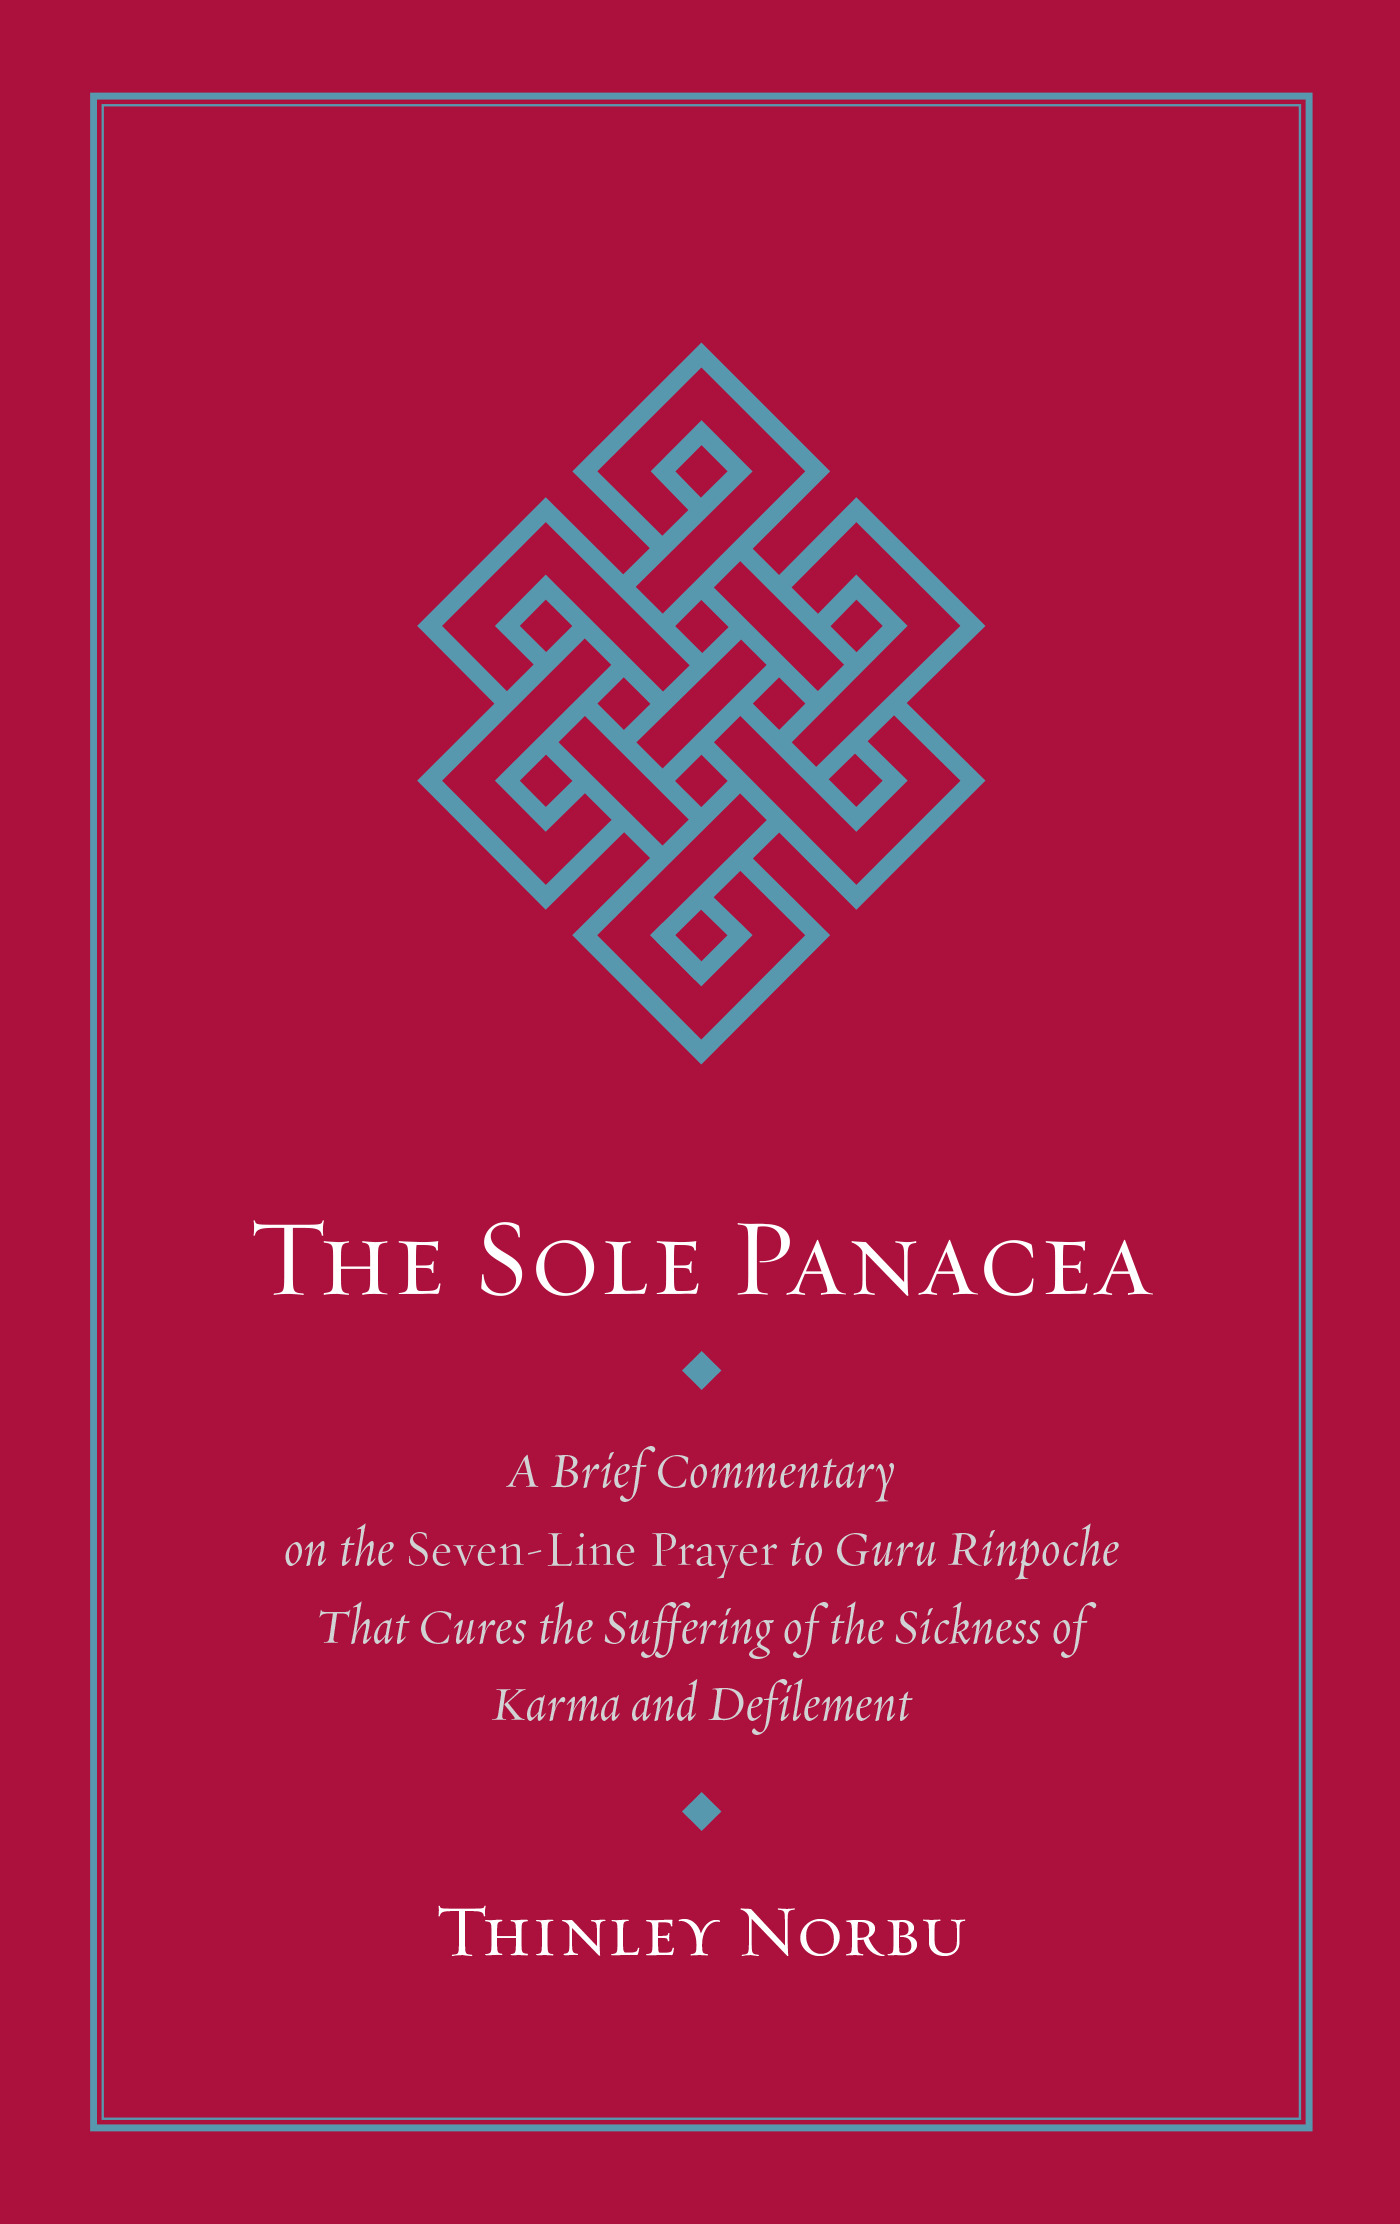 The Sole Panacea : A Brief Commentary on the Seven-Line Prayer to Guru Rinpoche That Cures the Suffering of the Sickness of Karma and Defilement | Norbu, Thinley